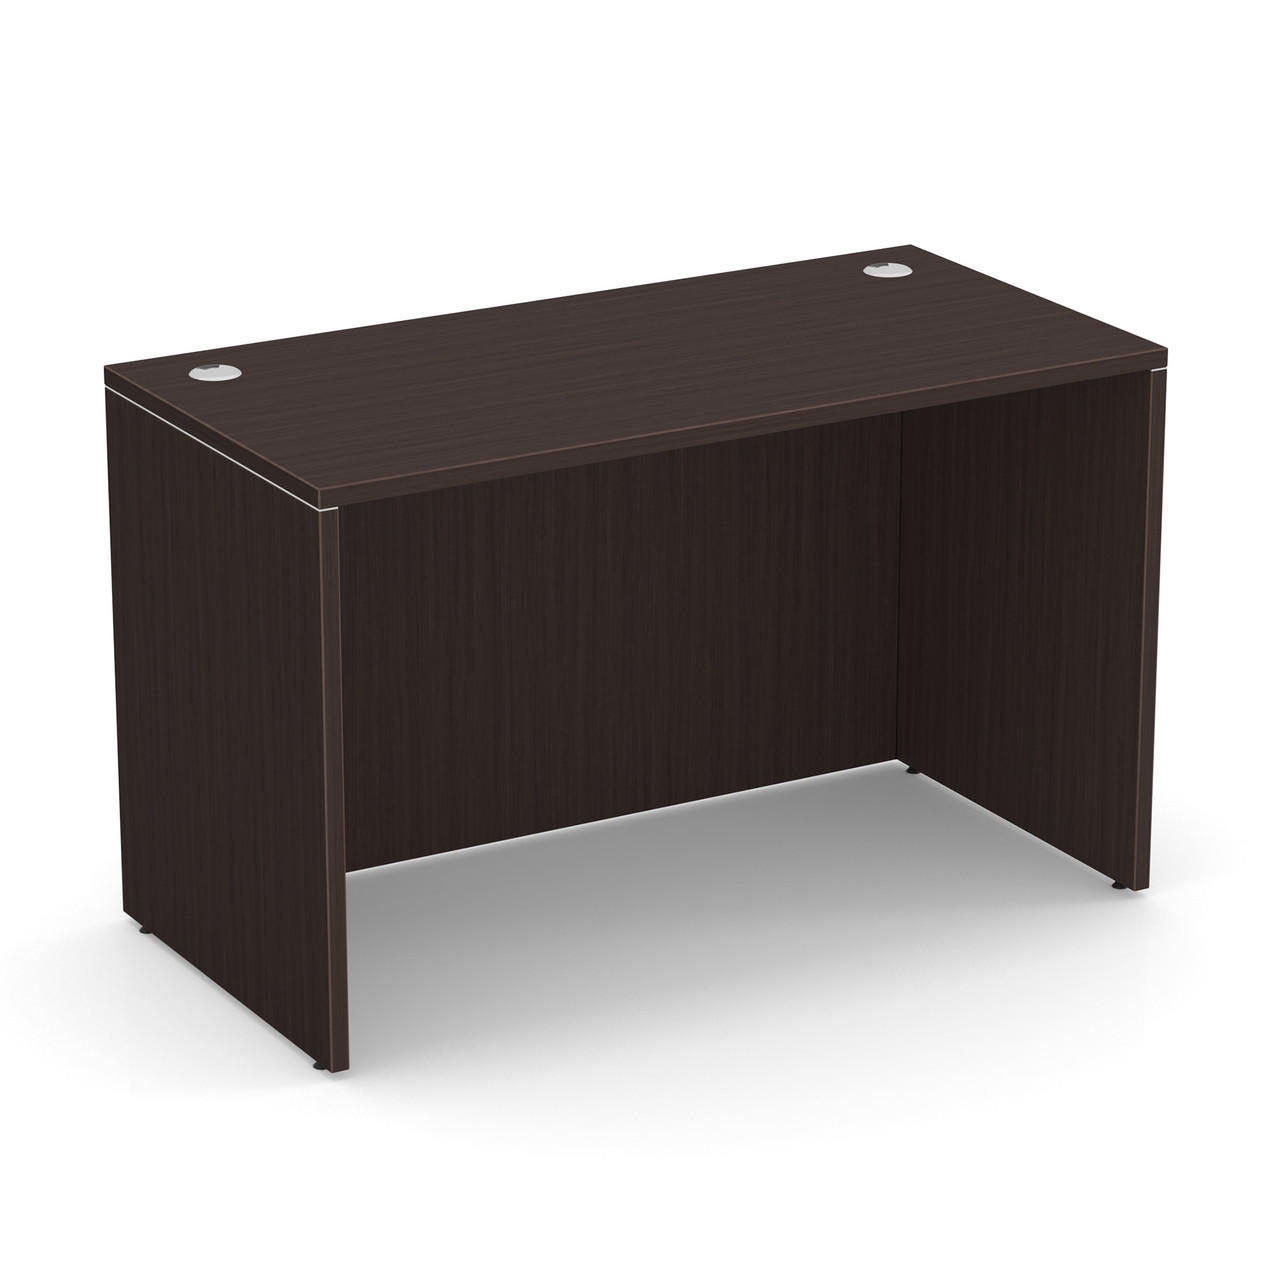  Office Source OS Laminate 60" x 30" Desk Shell PL103 